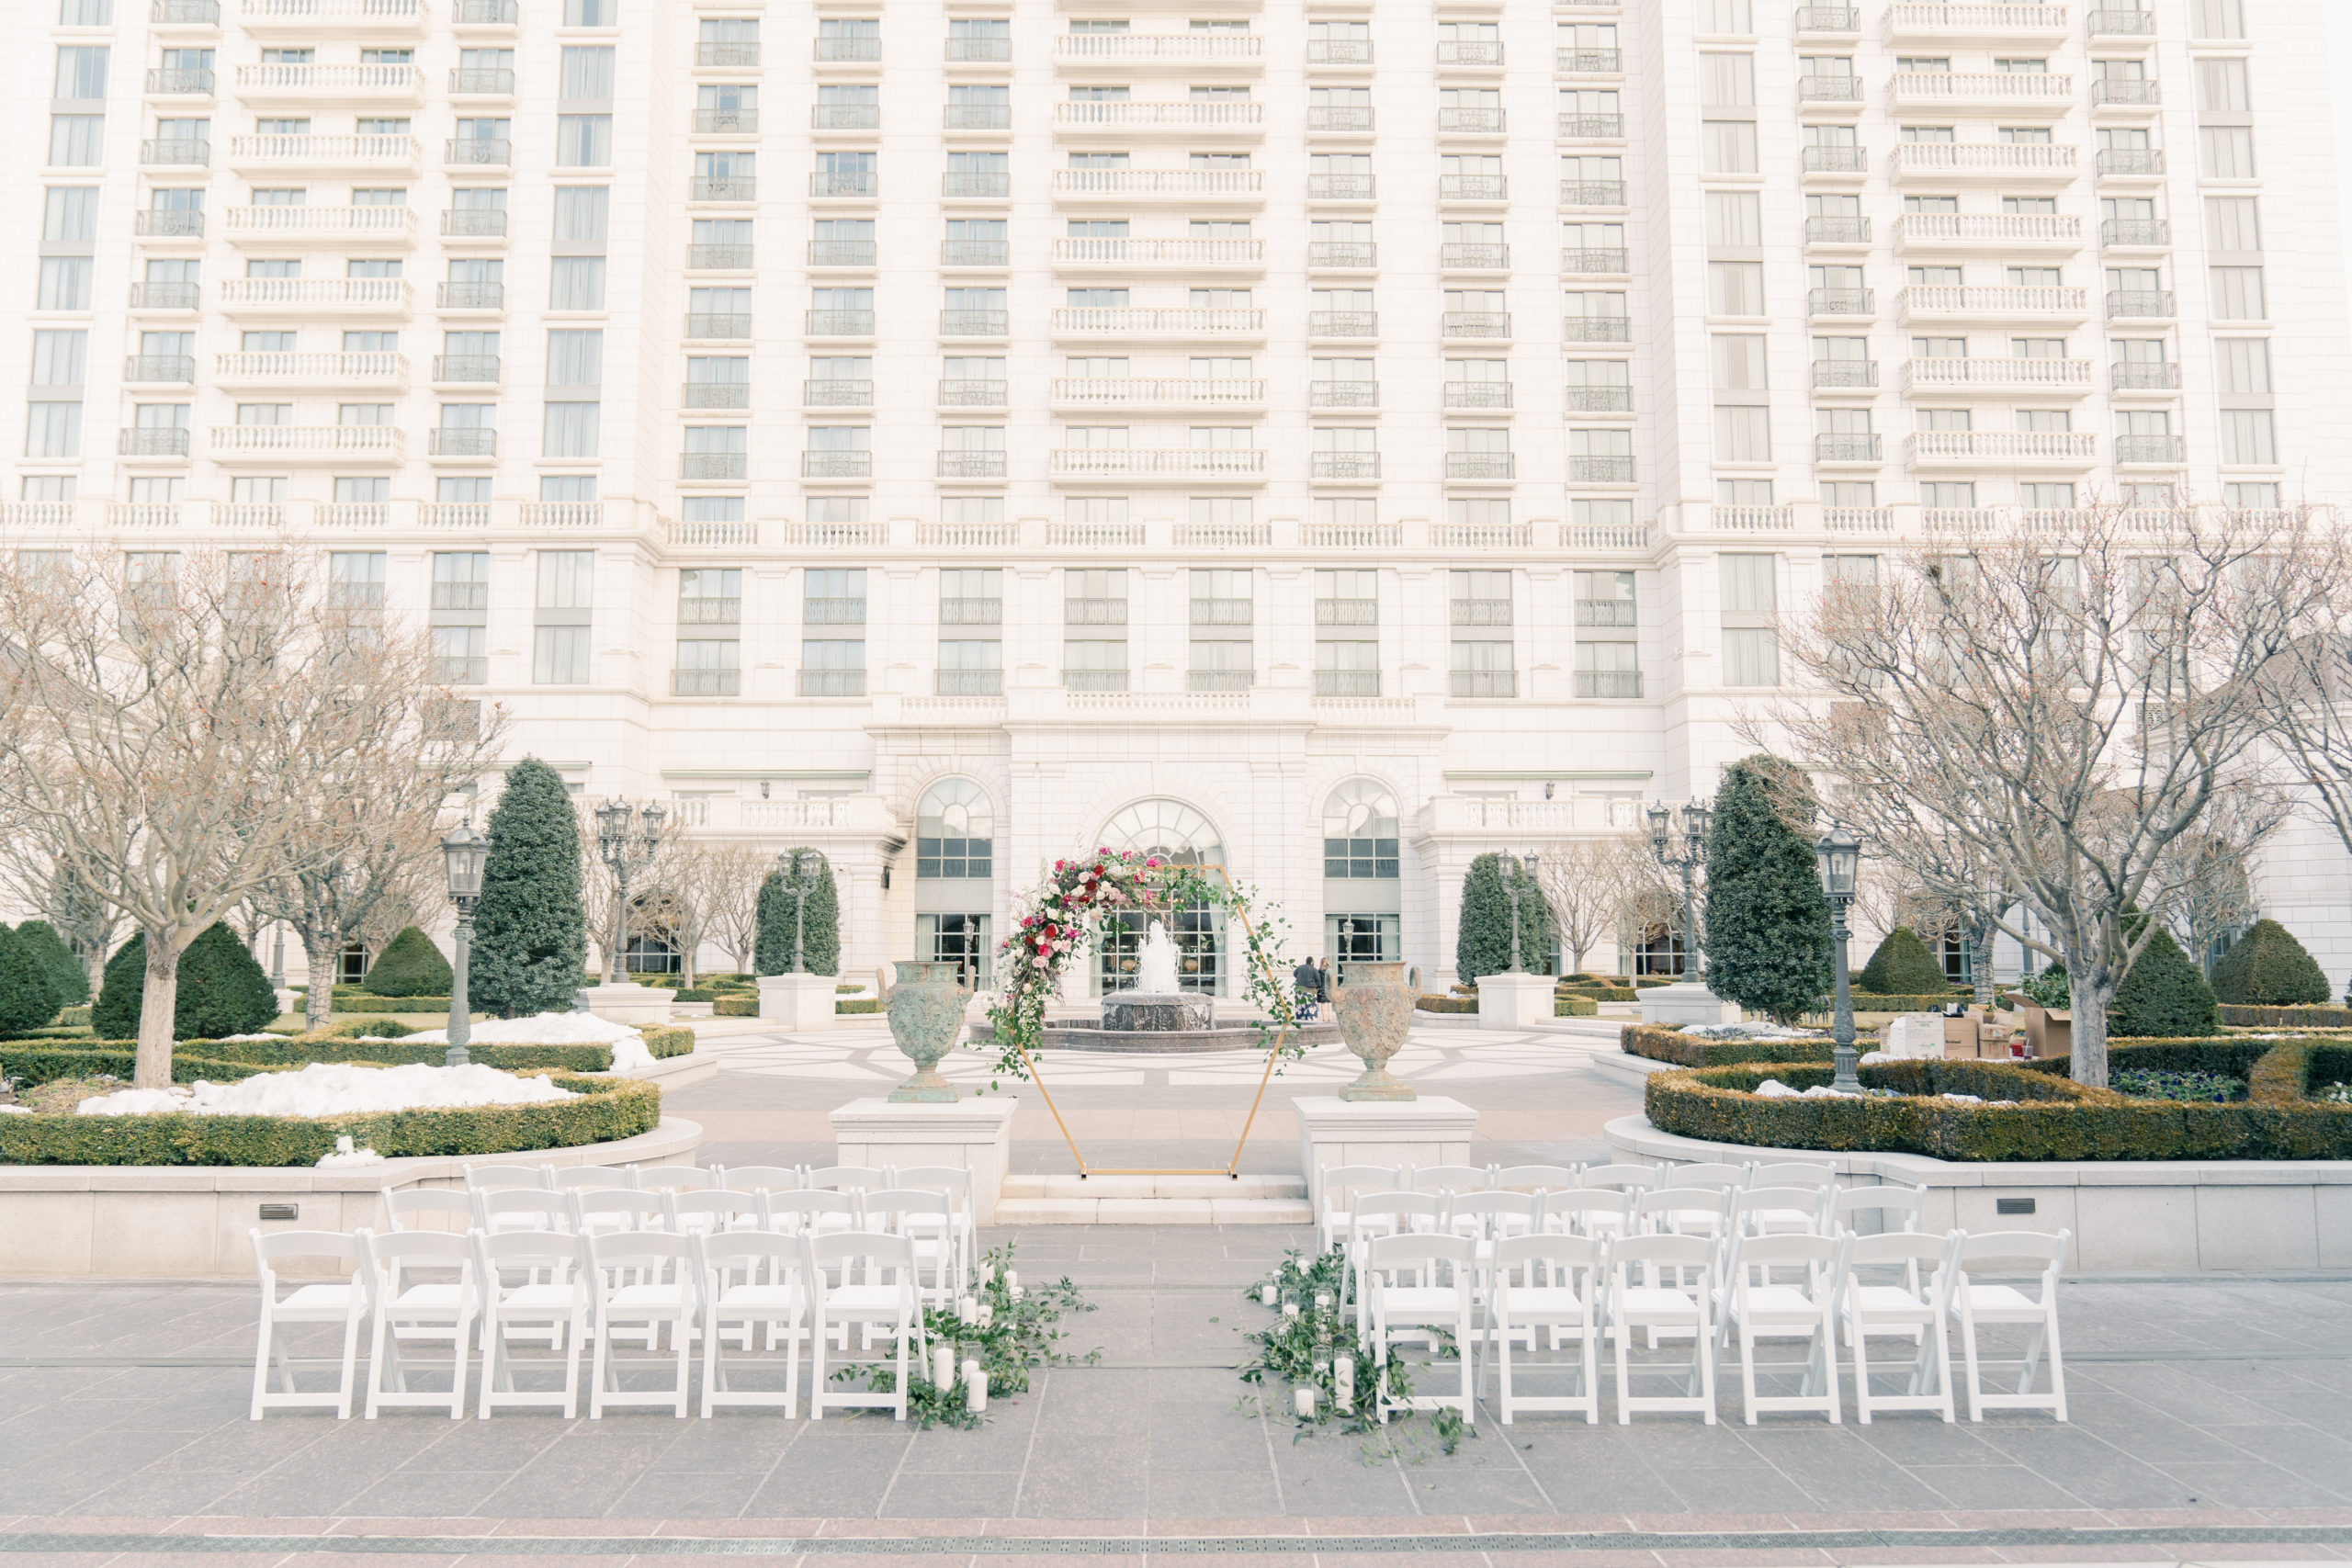 Outdoor wedding ceremony set up with white chairs and greenery in the courtyard.